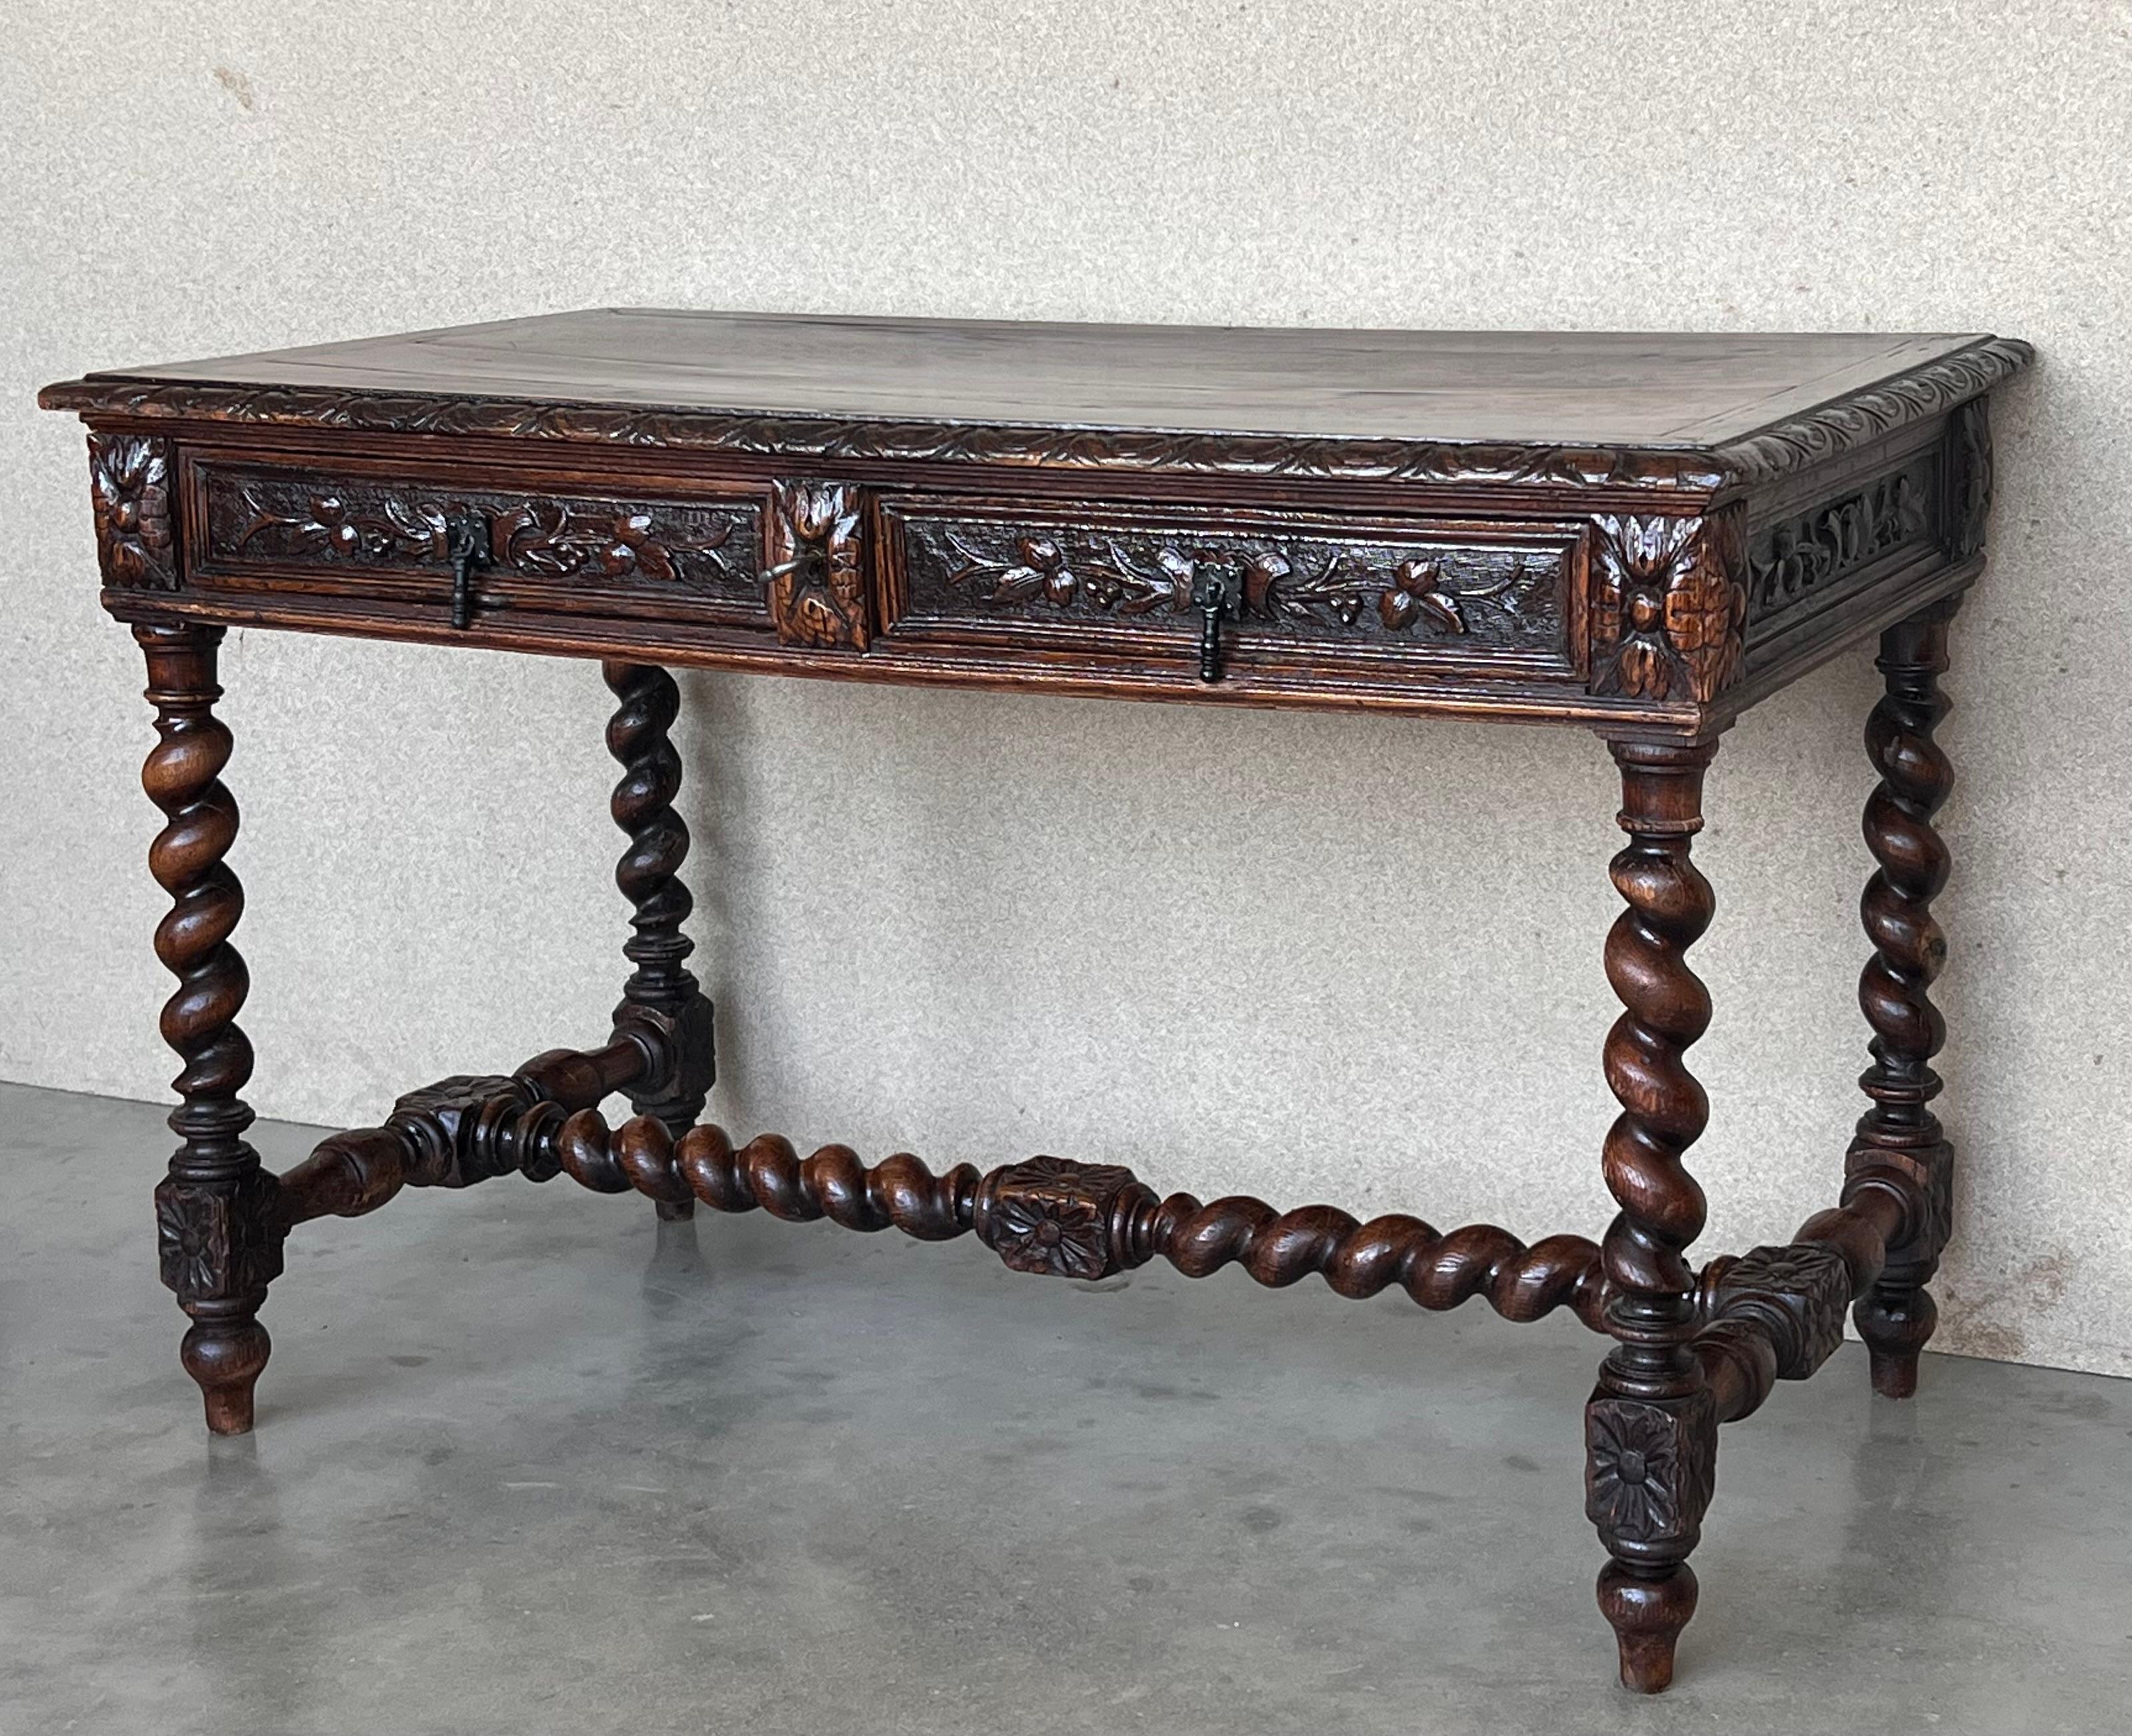 19th Century 19th Spanish Baroque Walnut Desk Table with Carved Frame and Solomonic Legs